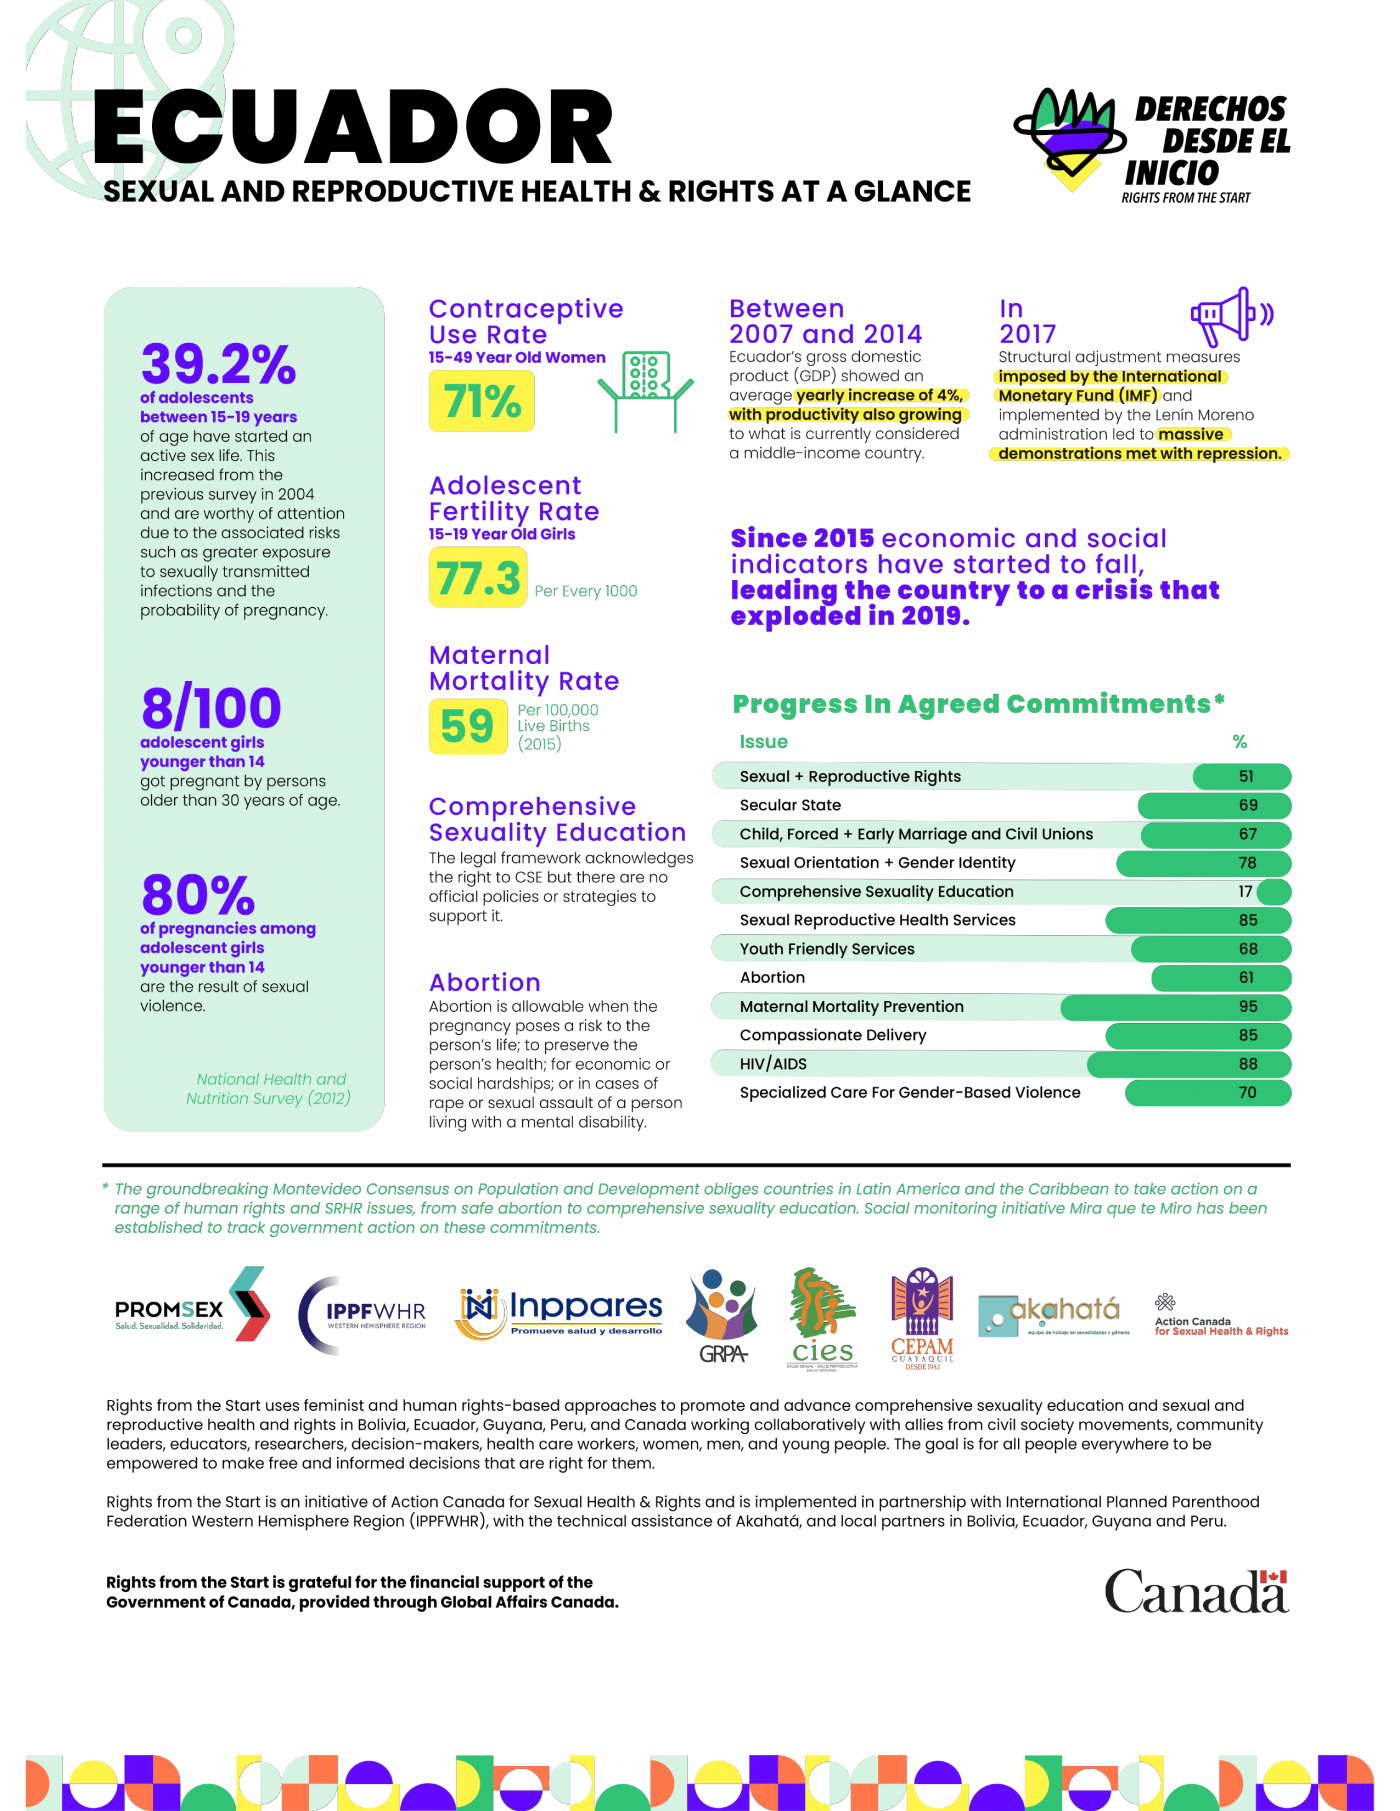 Infographics related to SRHR in Ecuador